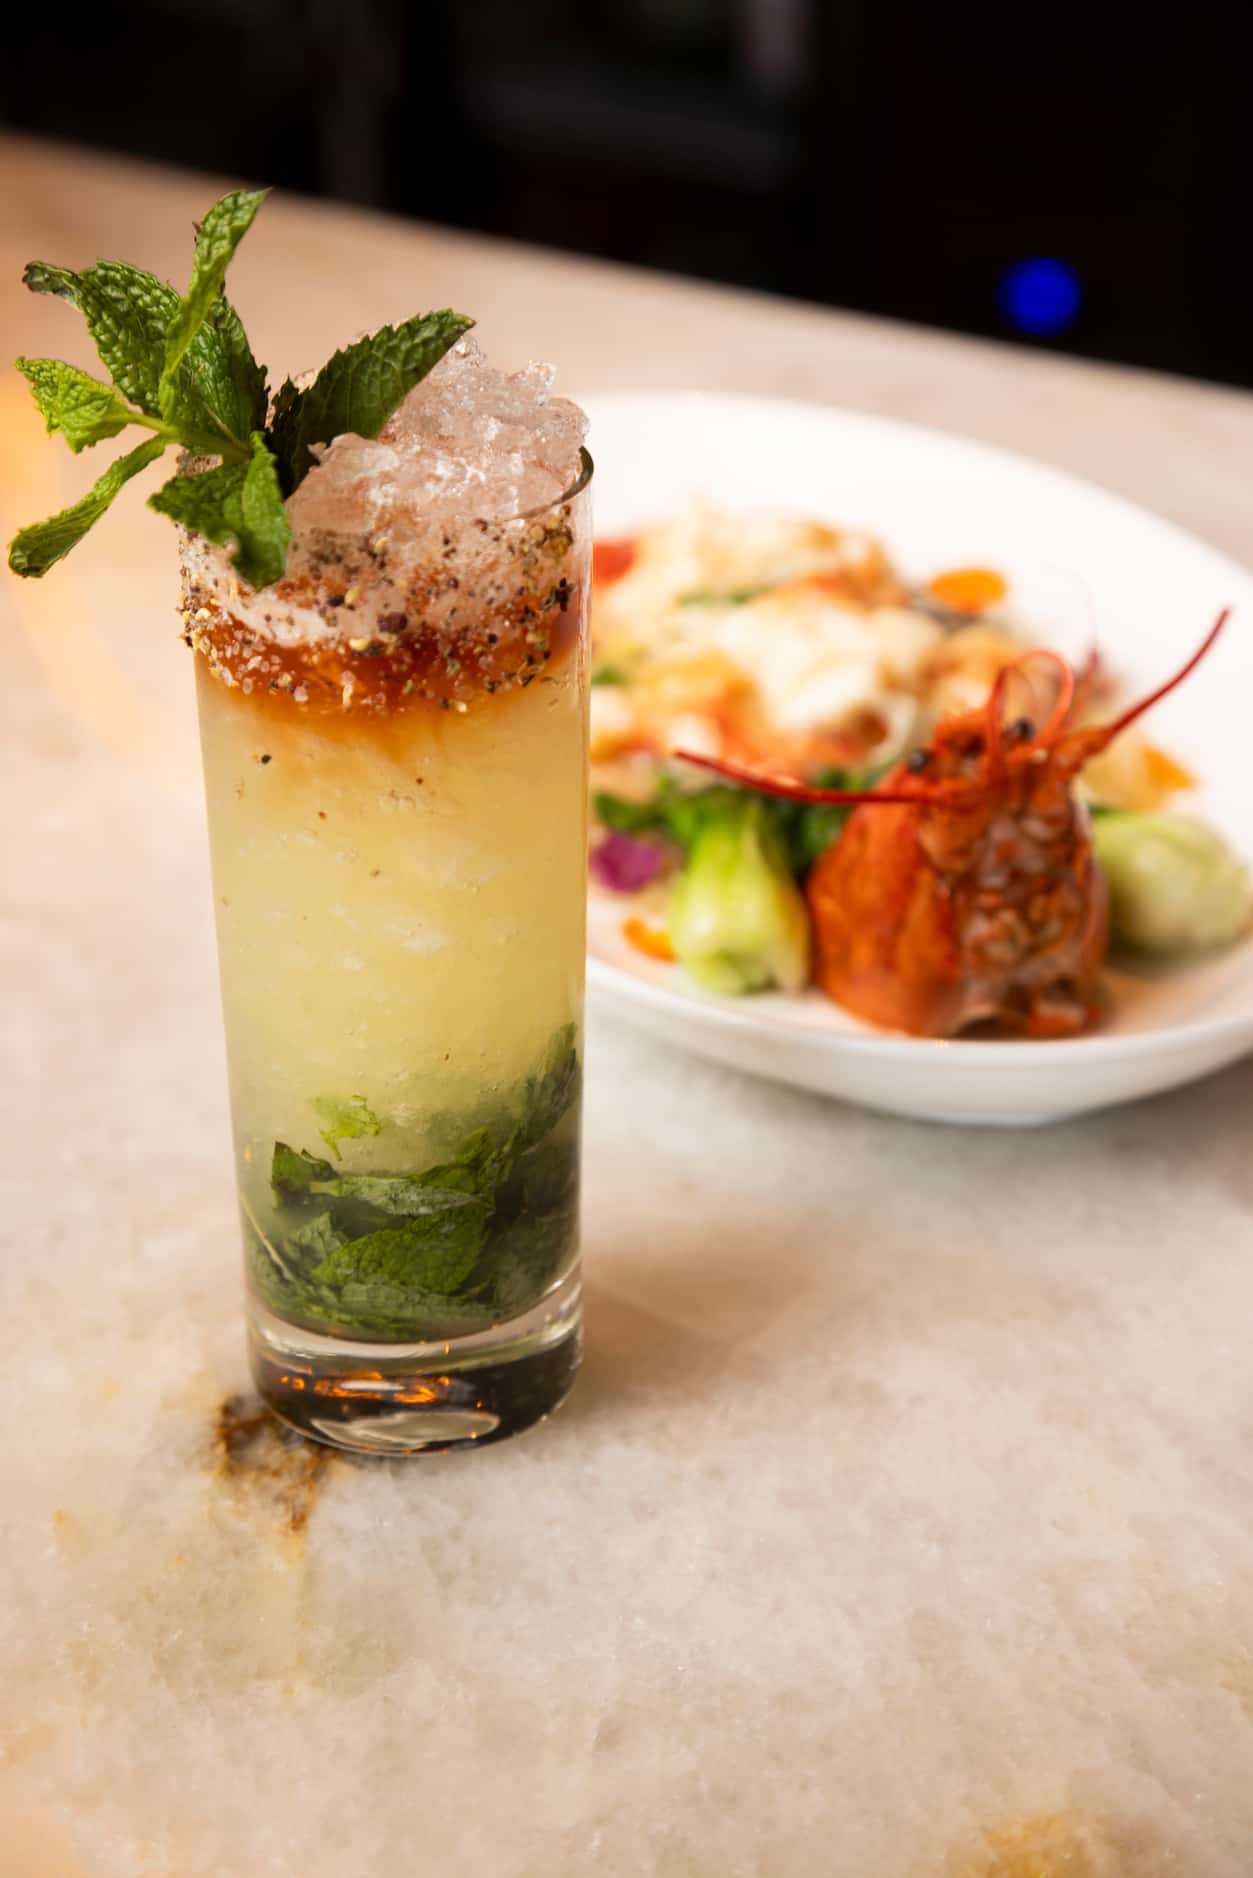 The Szechuan Sauce cocktail is photographed with the Live Maine Lobster at Maison Chinoise...